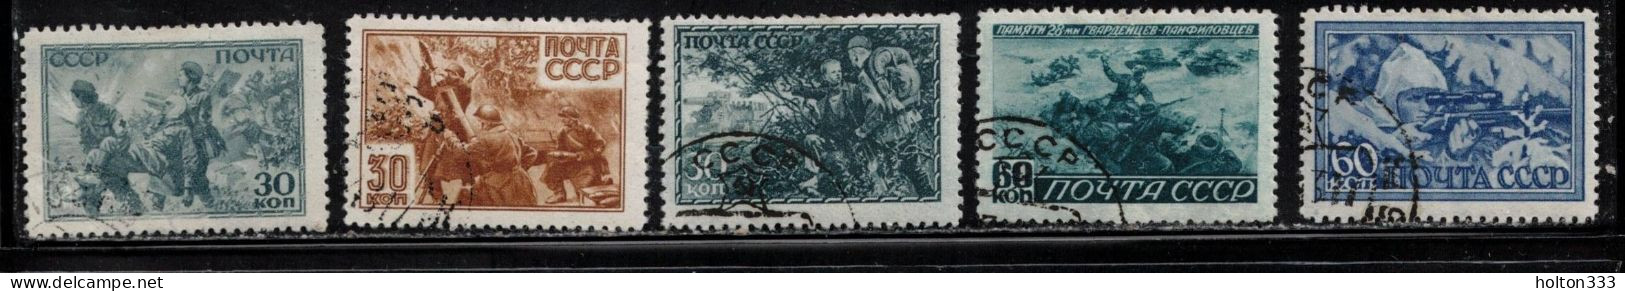 RUSSIA Scott # 890-4 Used - Soldiers & Military Scenes - Used Stamps